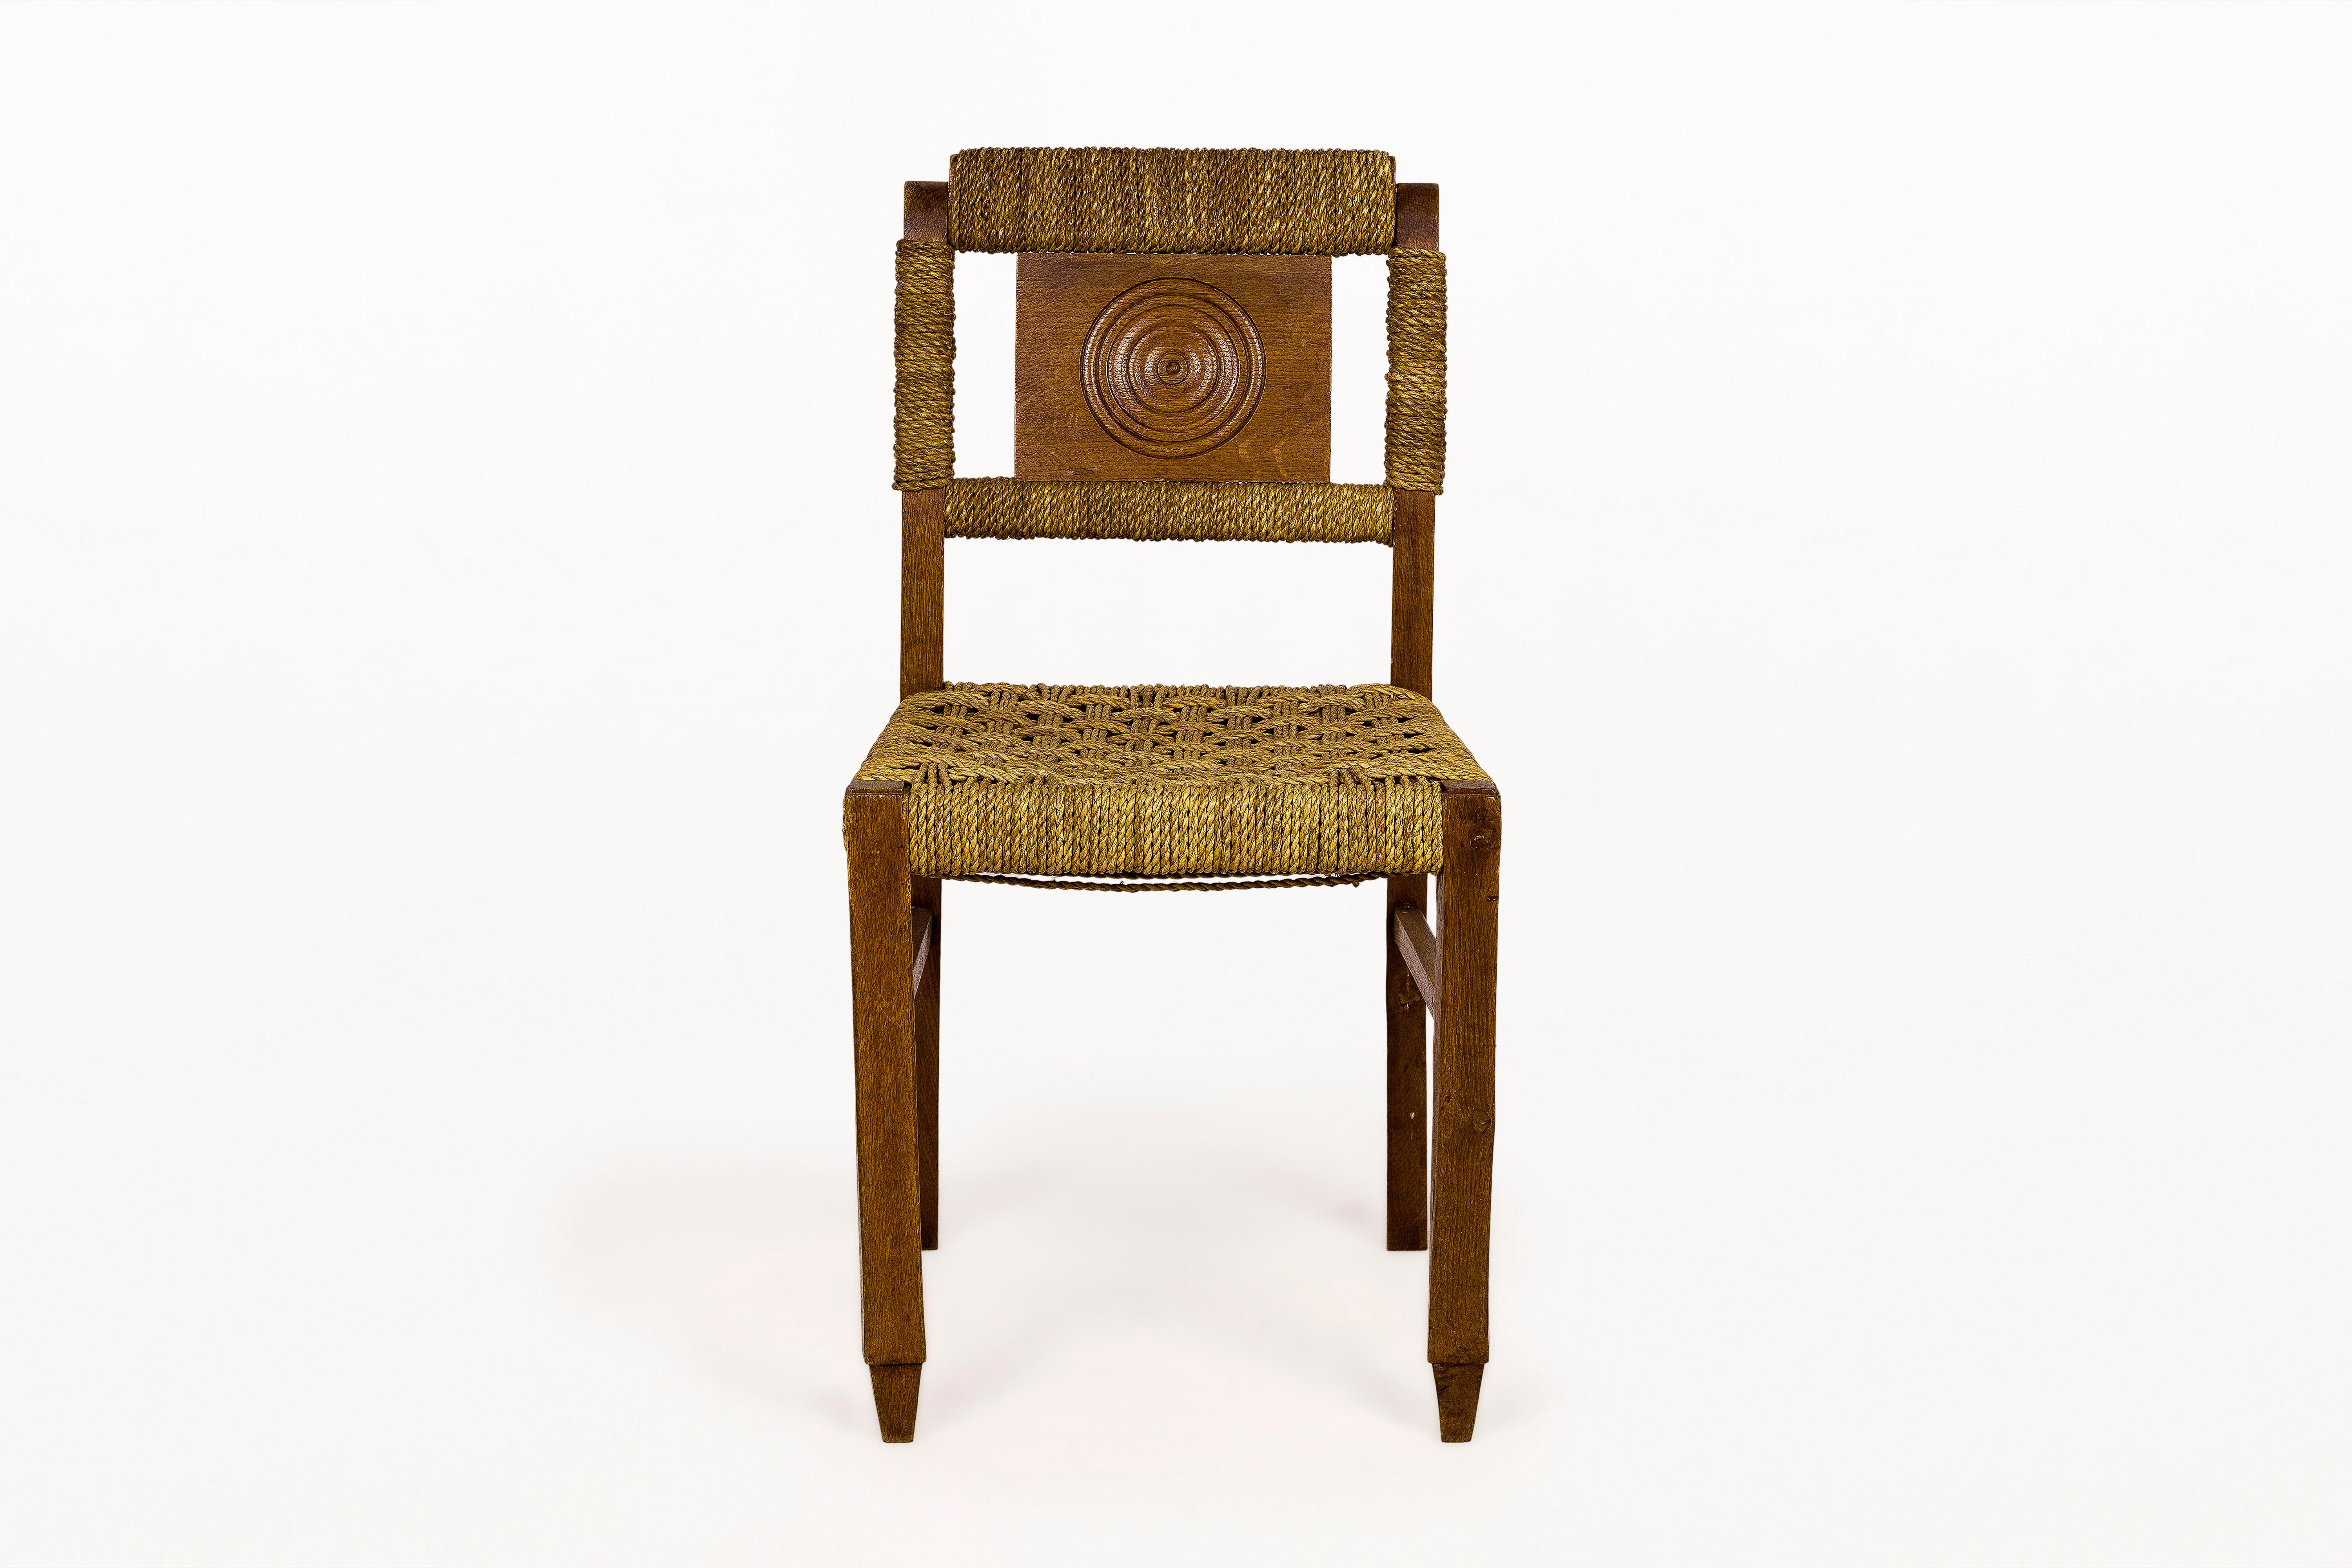 Set of six Victor Courtray dining chairs.
Made with oak and woven straw.
Solid and sturdy,
circa 1940, France.
Good vintage condition.
Victor Henri Courtray was a French designer, interior designer and furniture designer born July 22, 1896 in